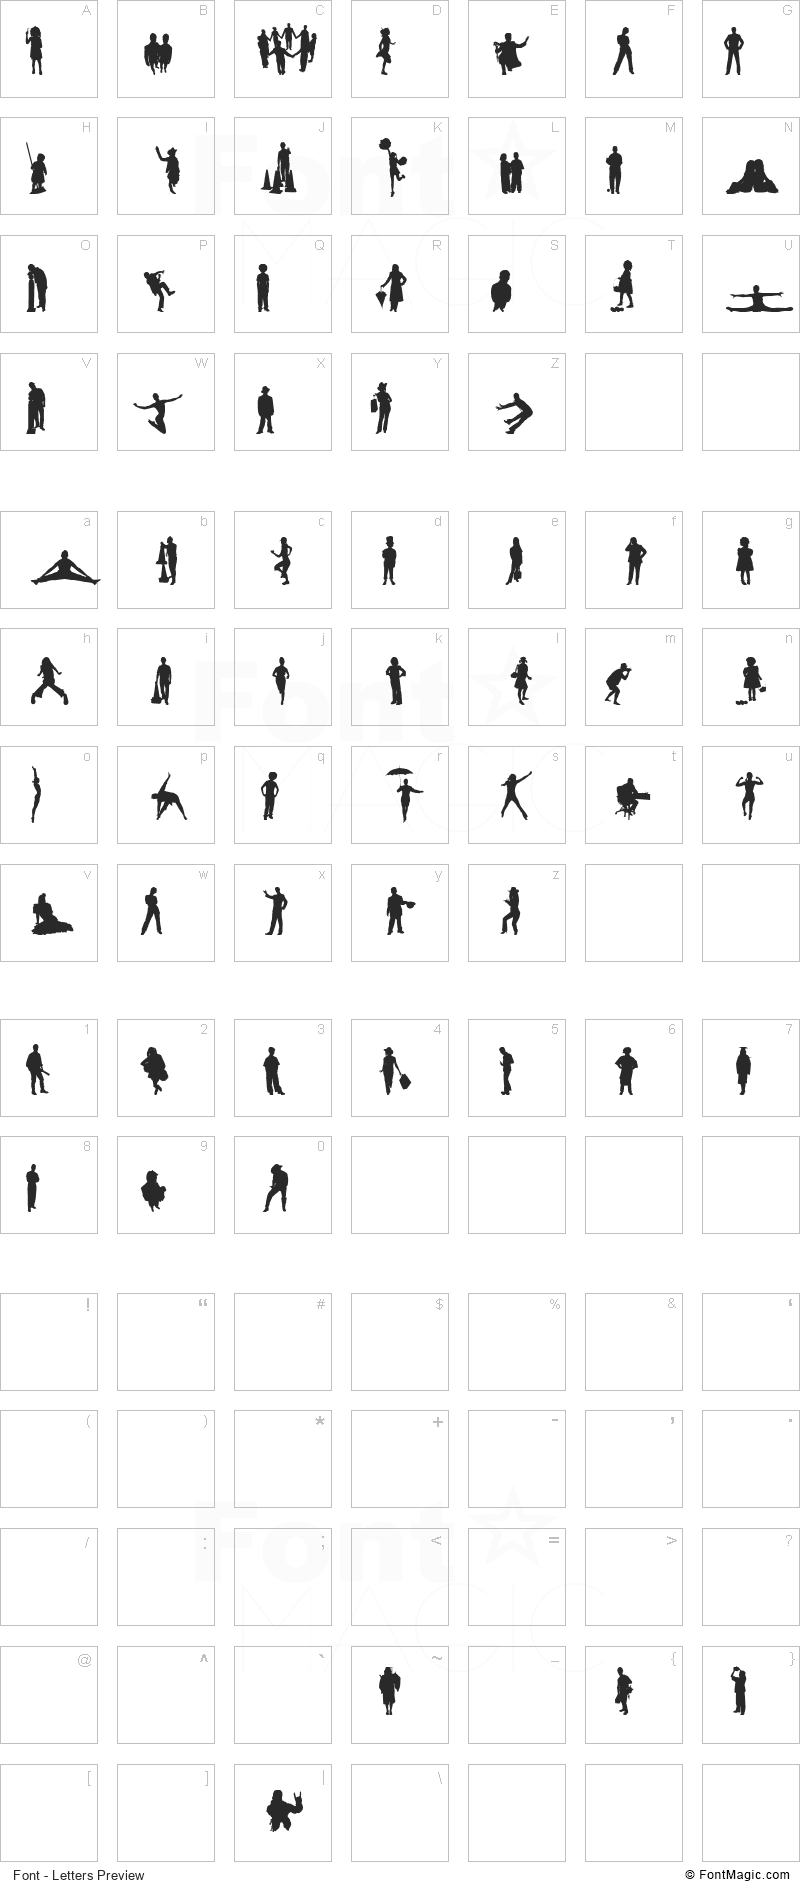 Human Silhouettes Five Font - All Latters Preview Chart